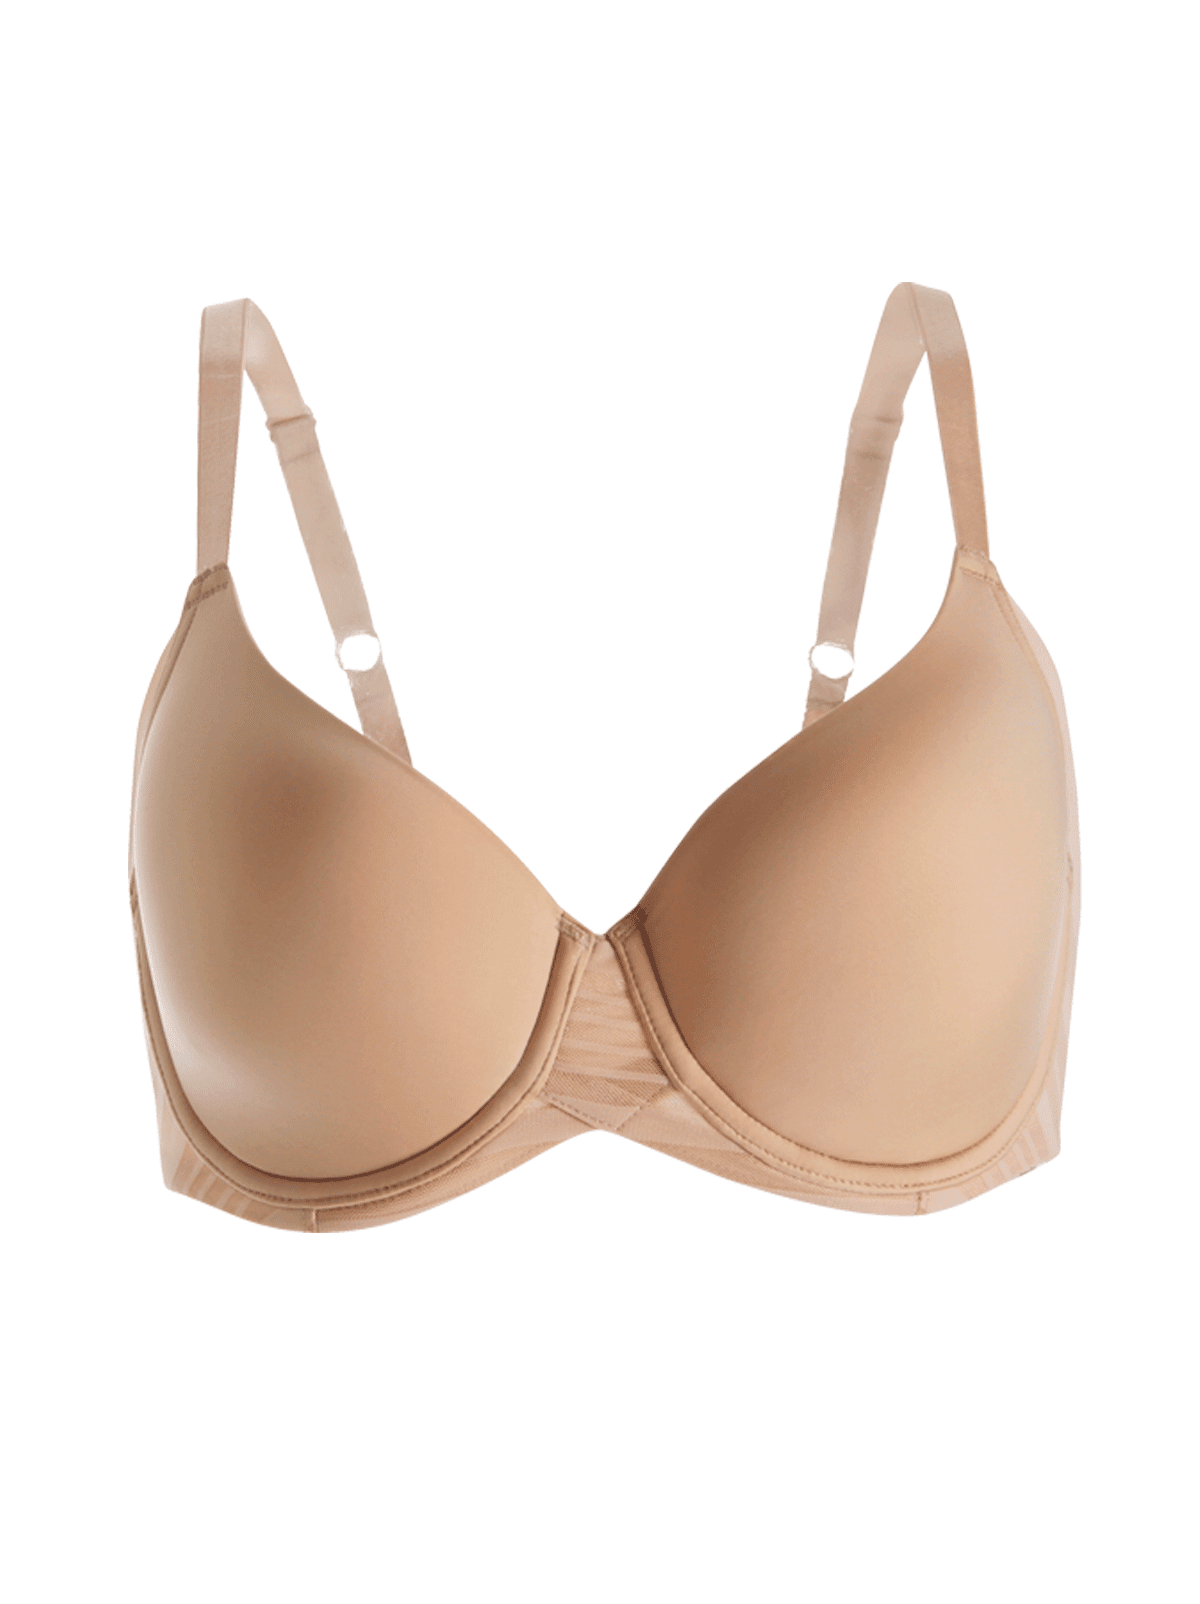 Paramour Women's Marvelous Side Smoother Seamless Bra - Buff Beige 38DD